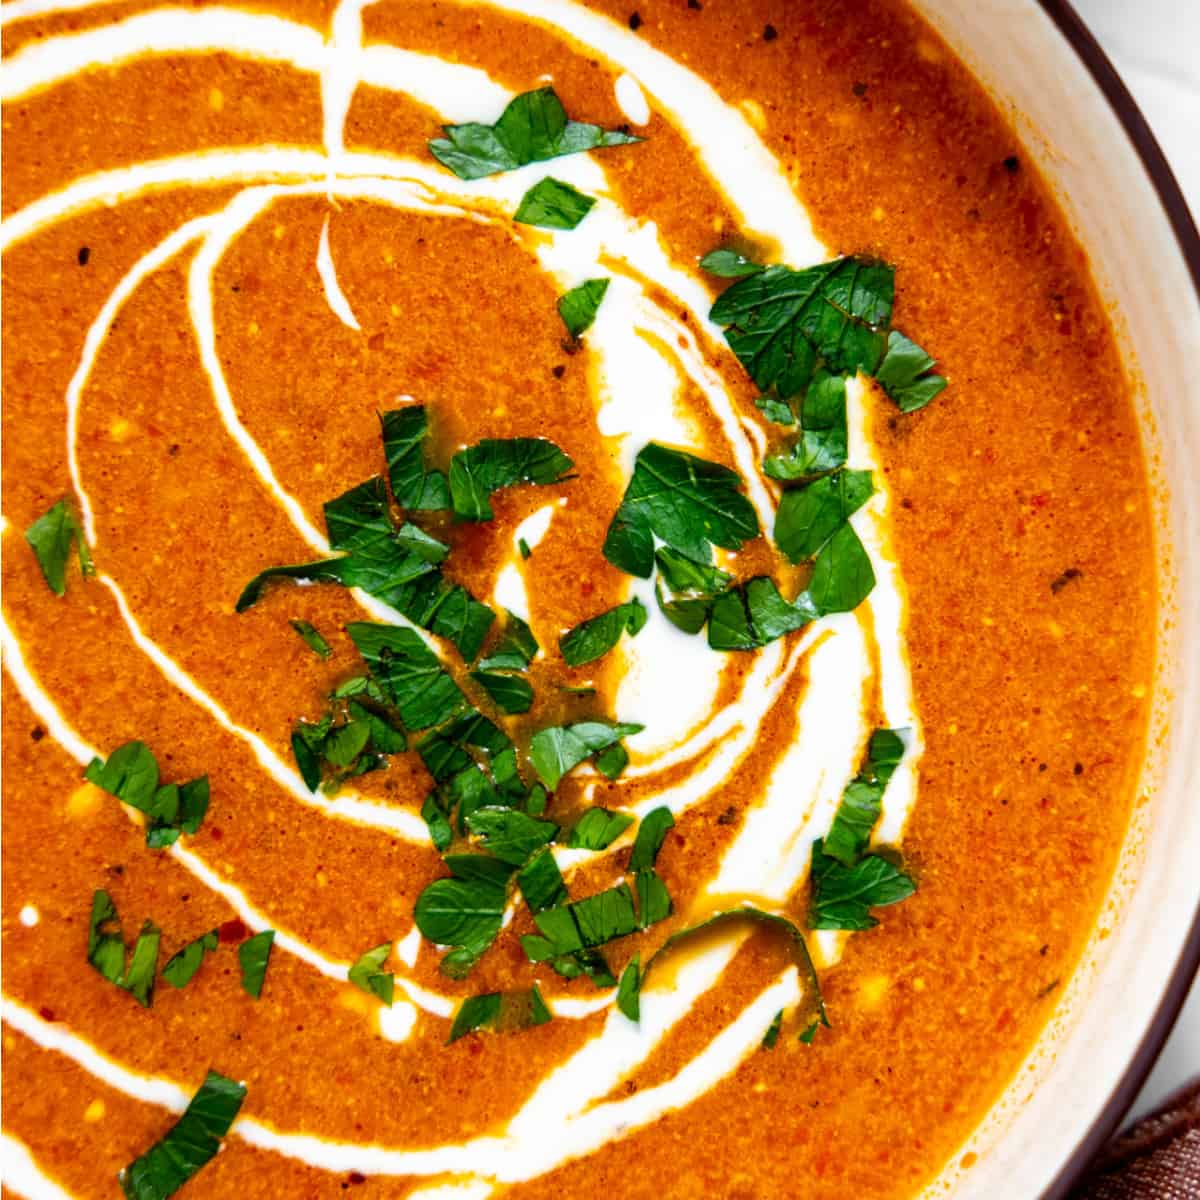 Roasted red pepper soup topped with sour cream and herbs.